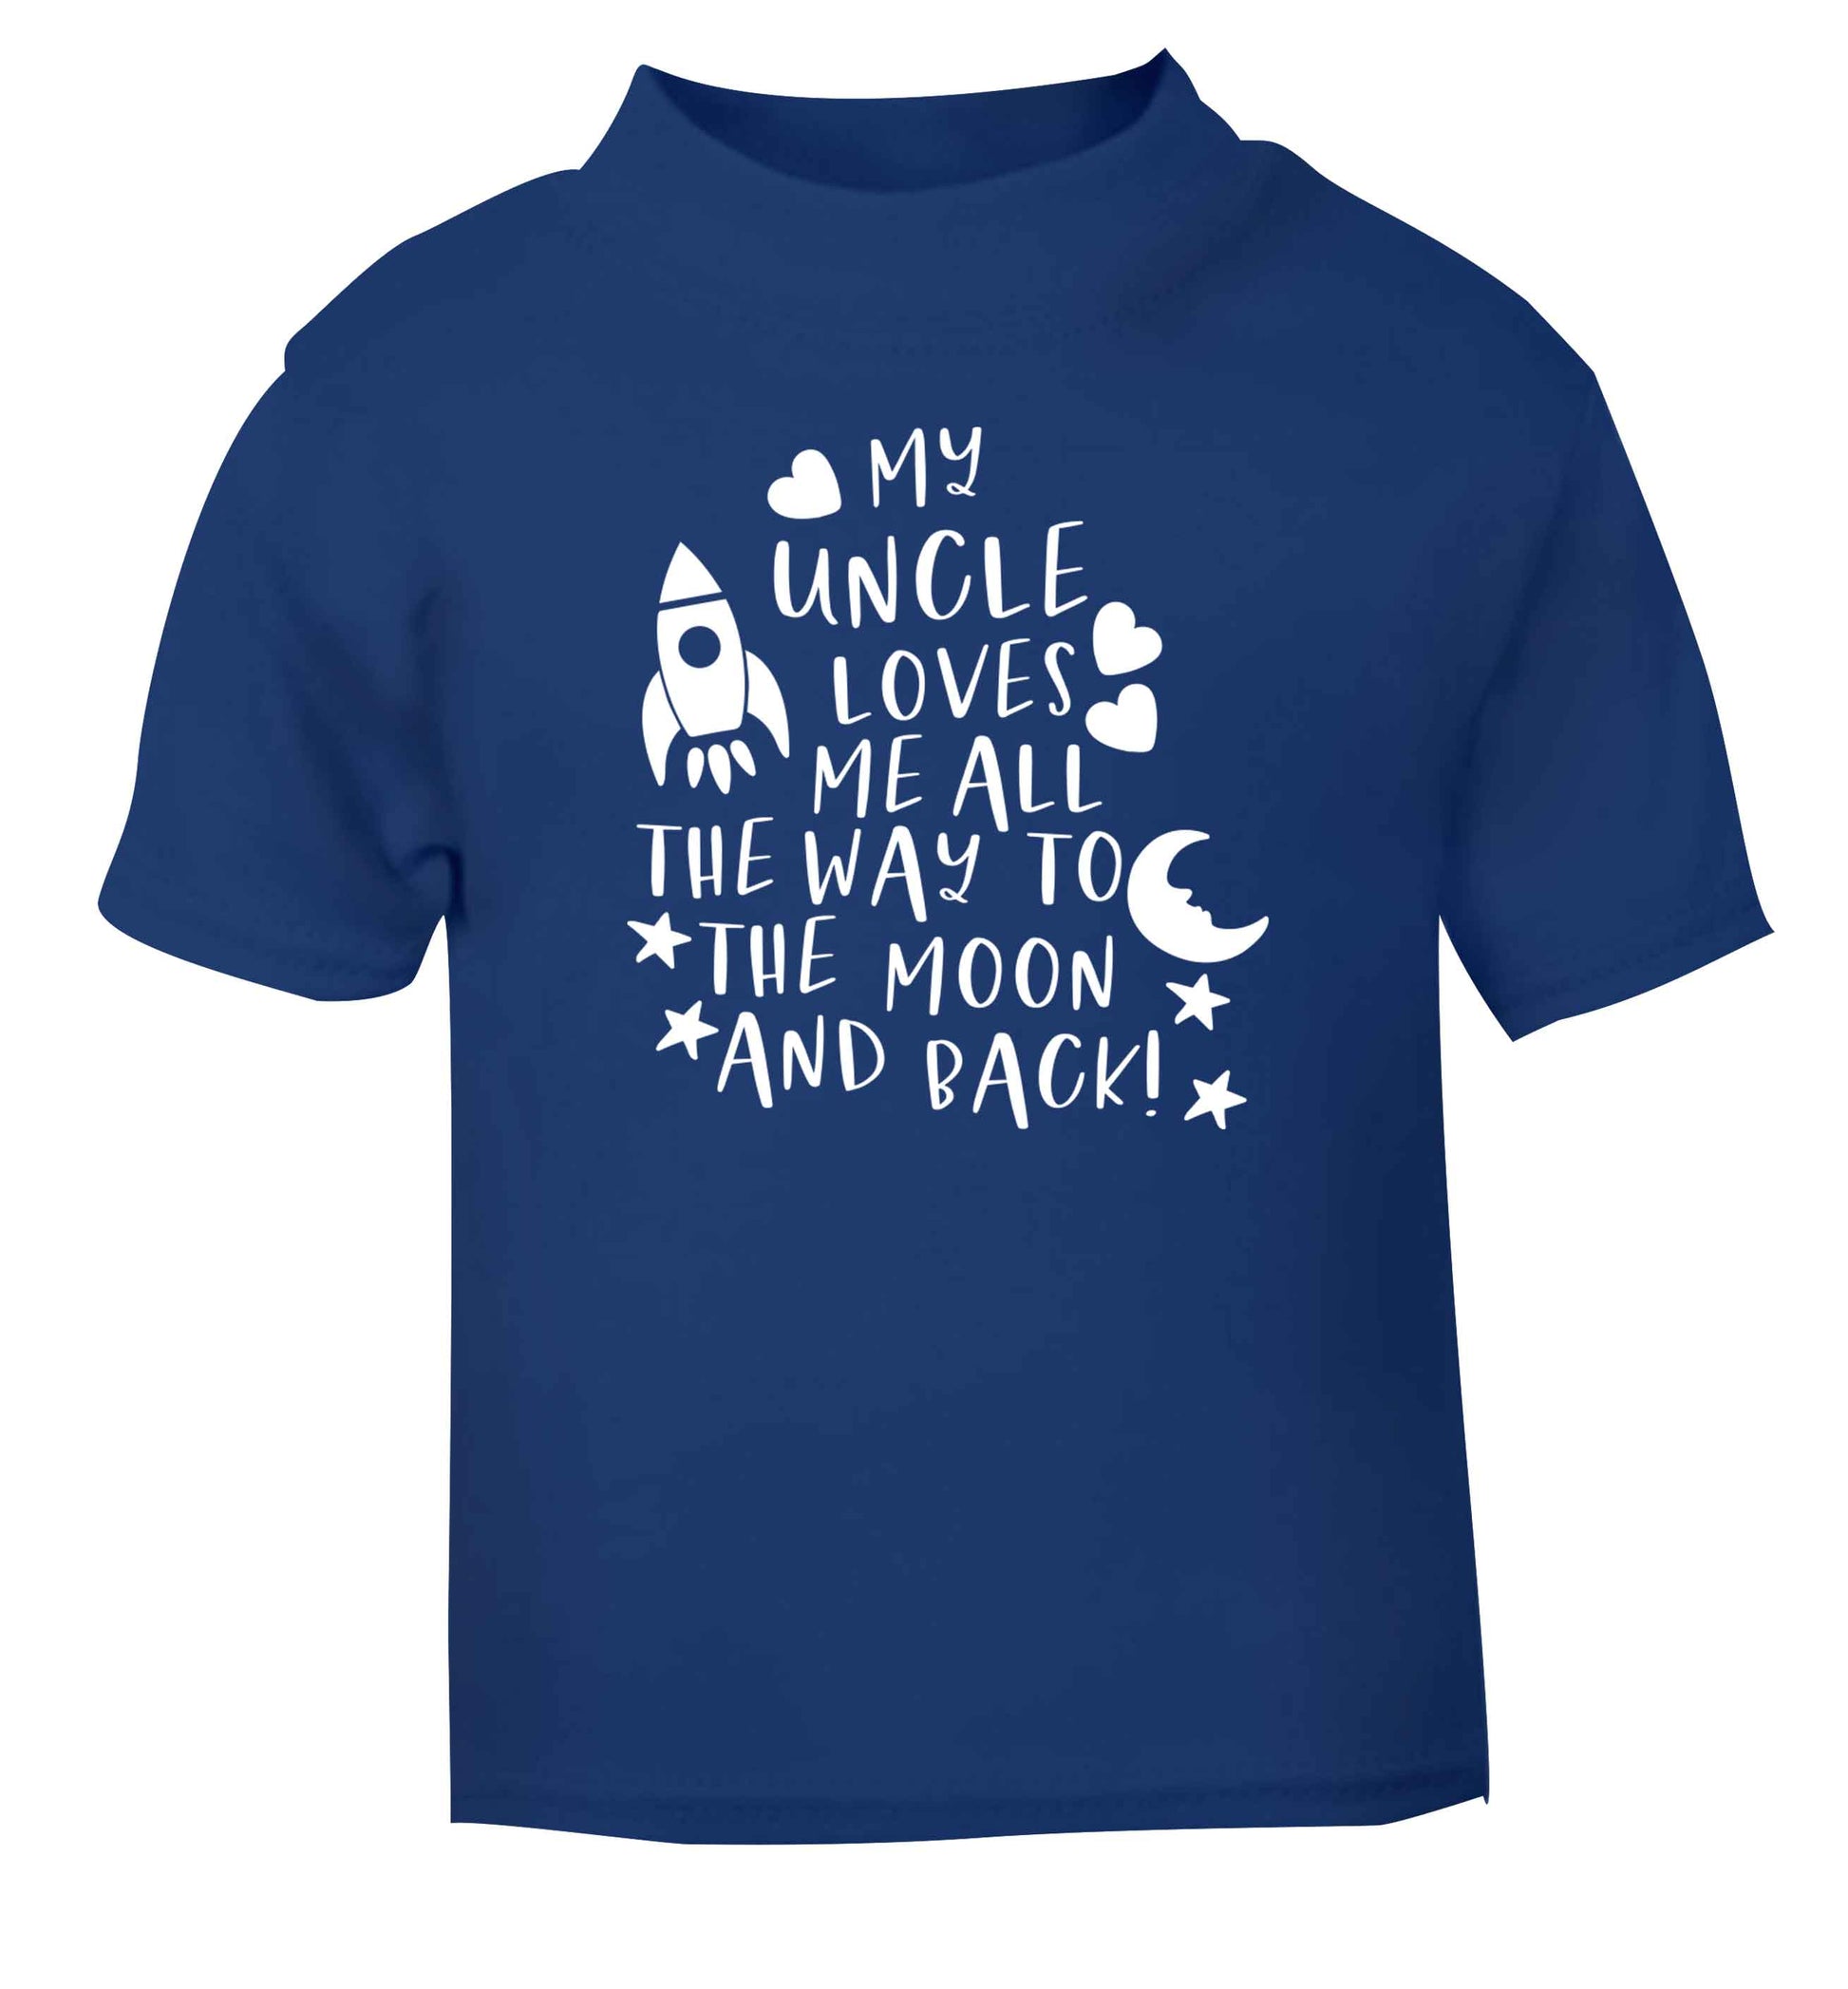 My uncle loves me all the way to the moon and back blue Baby Toddler Tshirt 2 Years